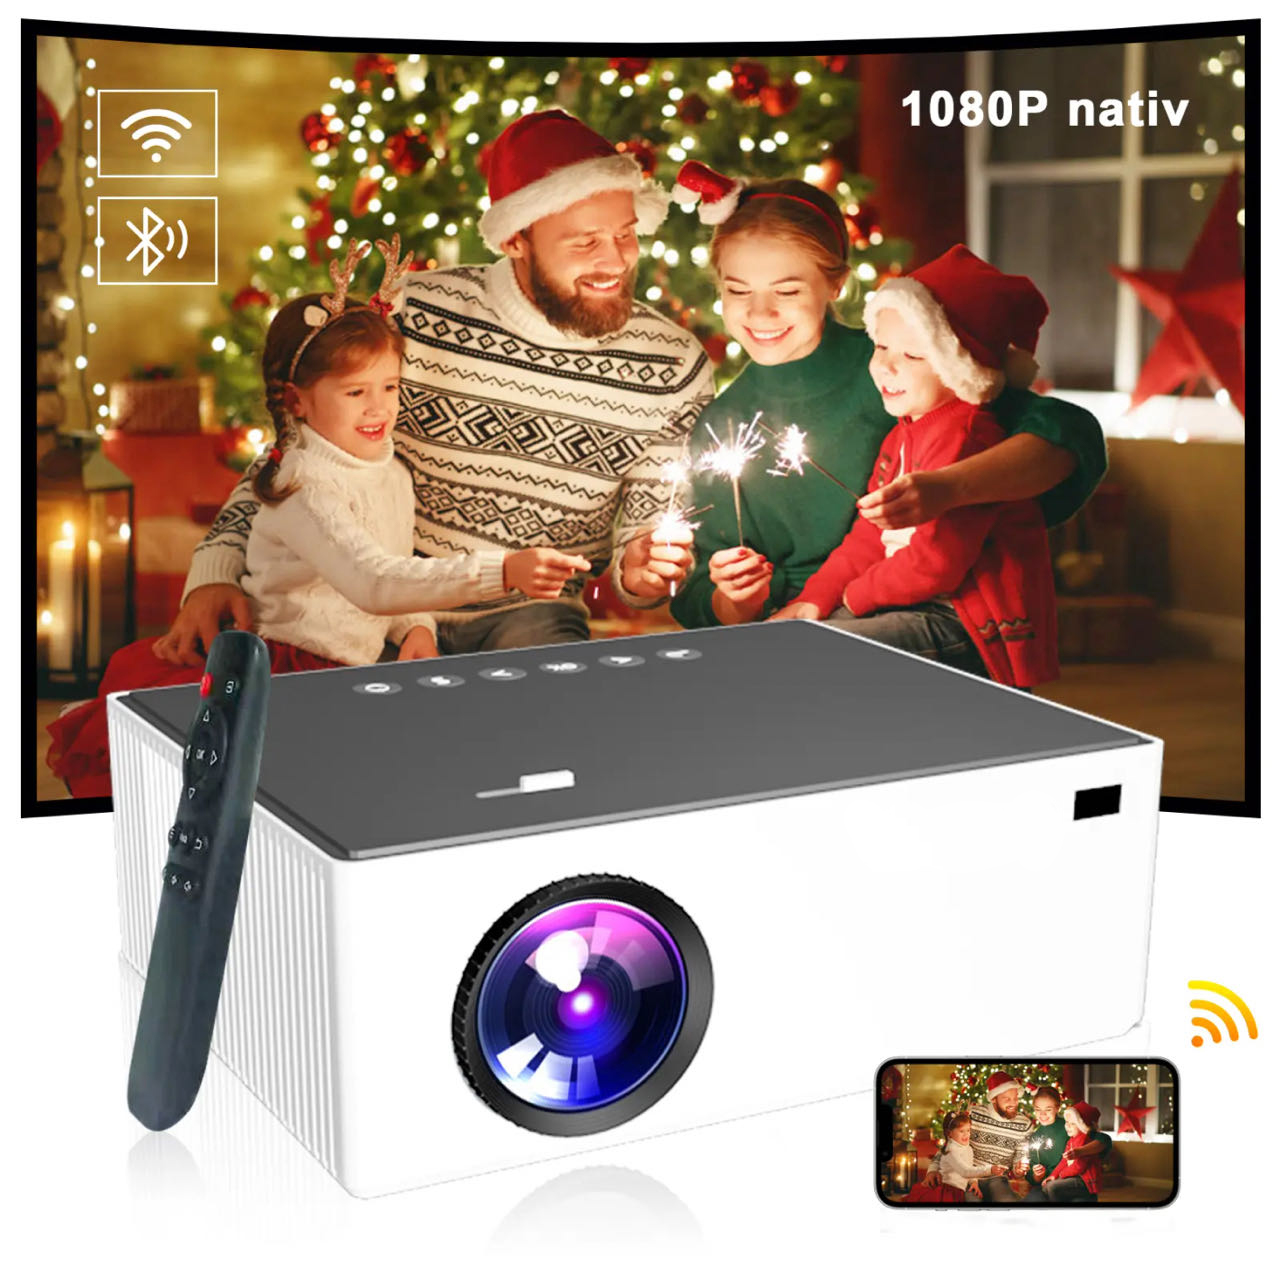 Gifts, home this projector will be your choice!